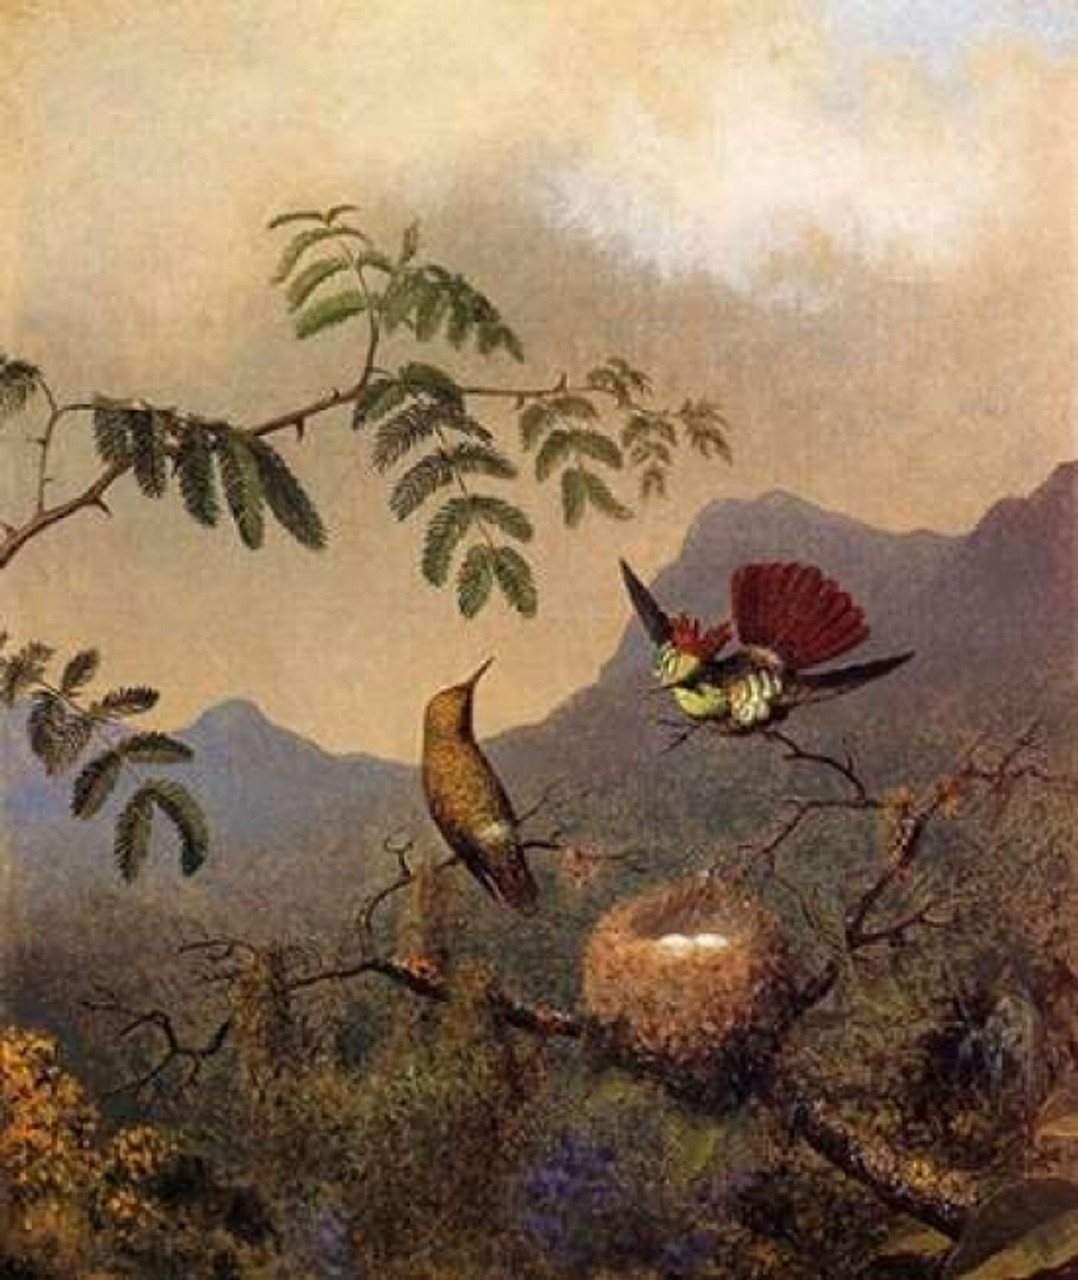 Frilled Coquette Poster Print by Martin Johnson Heade - Item # VARPDX375805